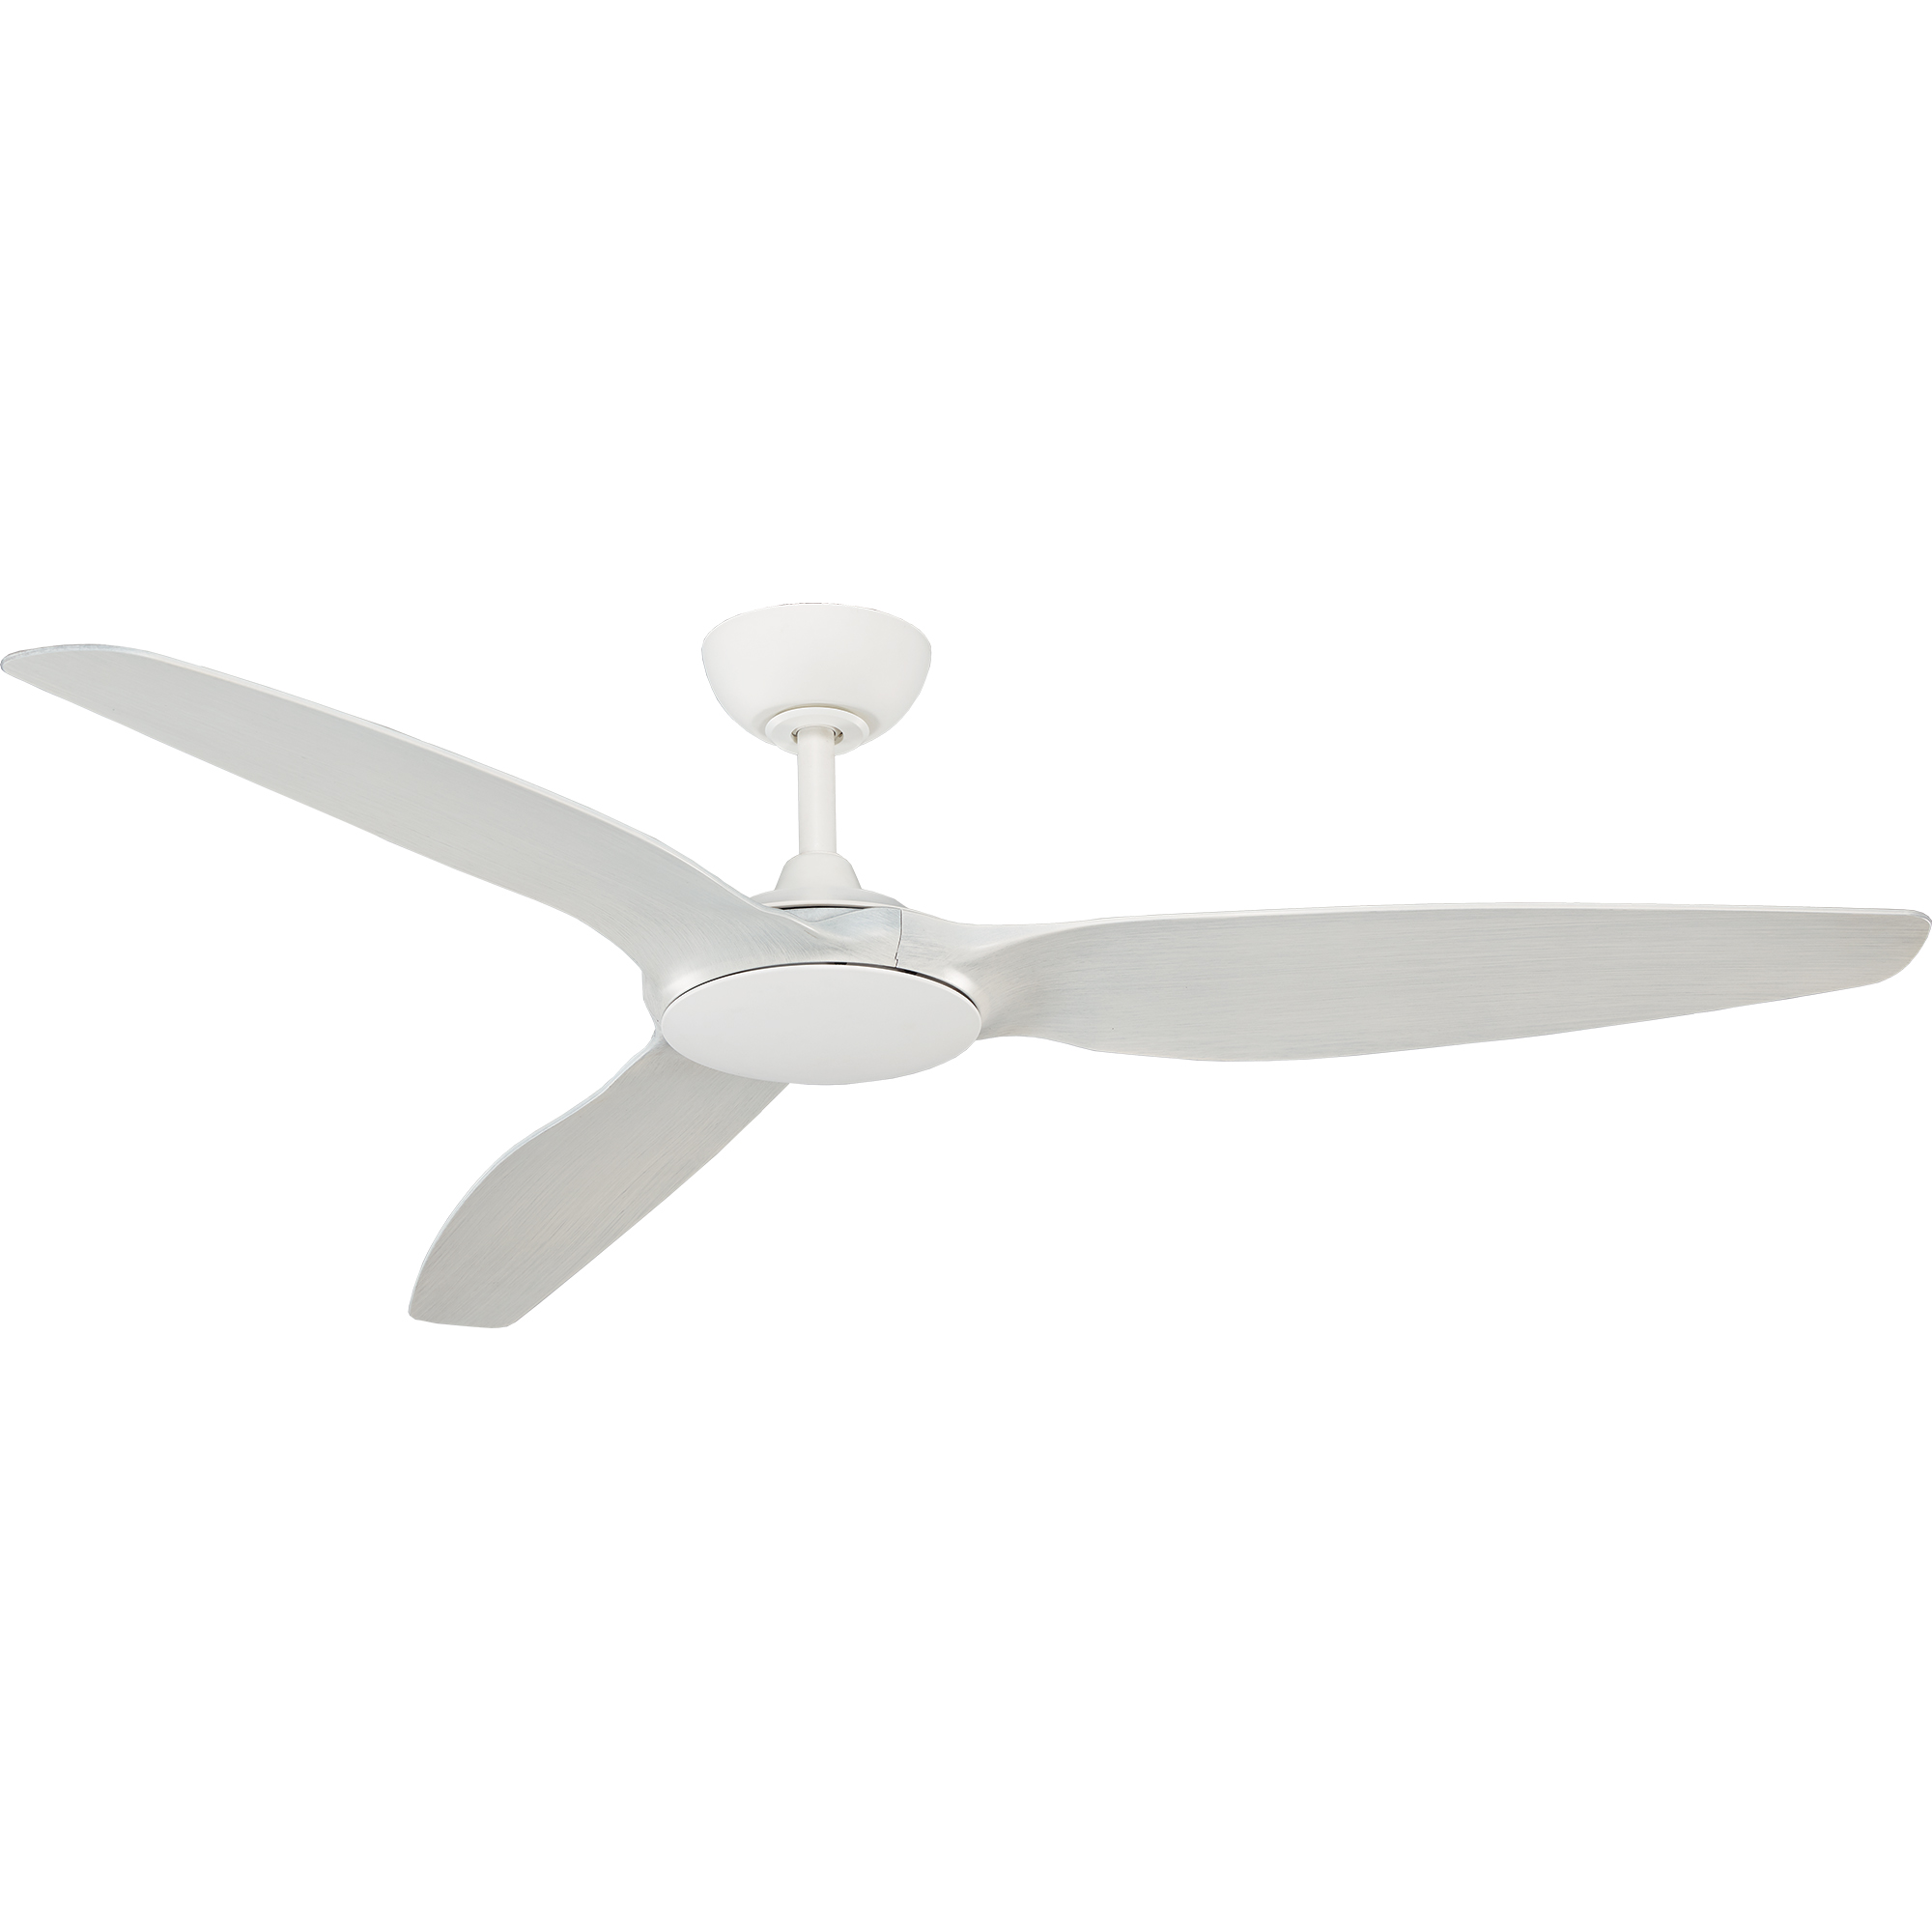 60" Flume Ceiling Fan in Matte White with White Wash blades